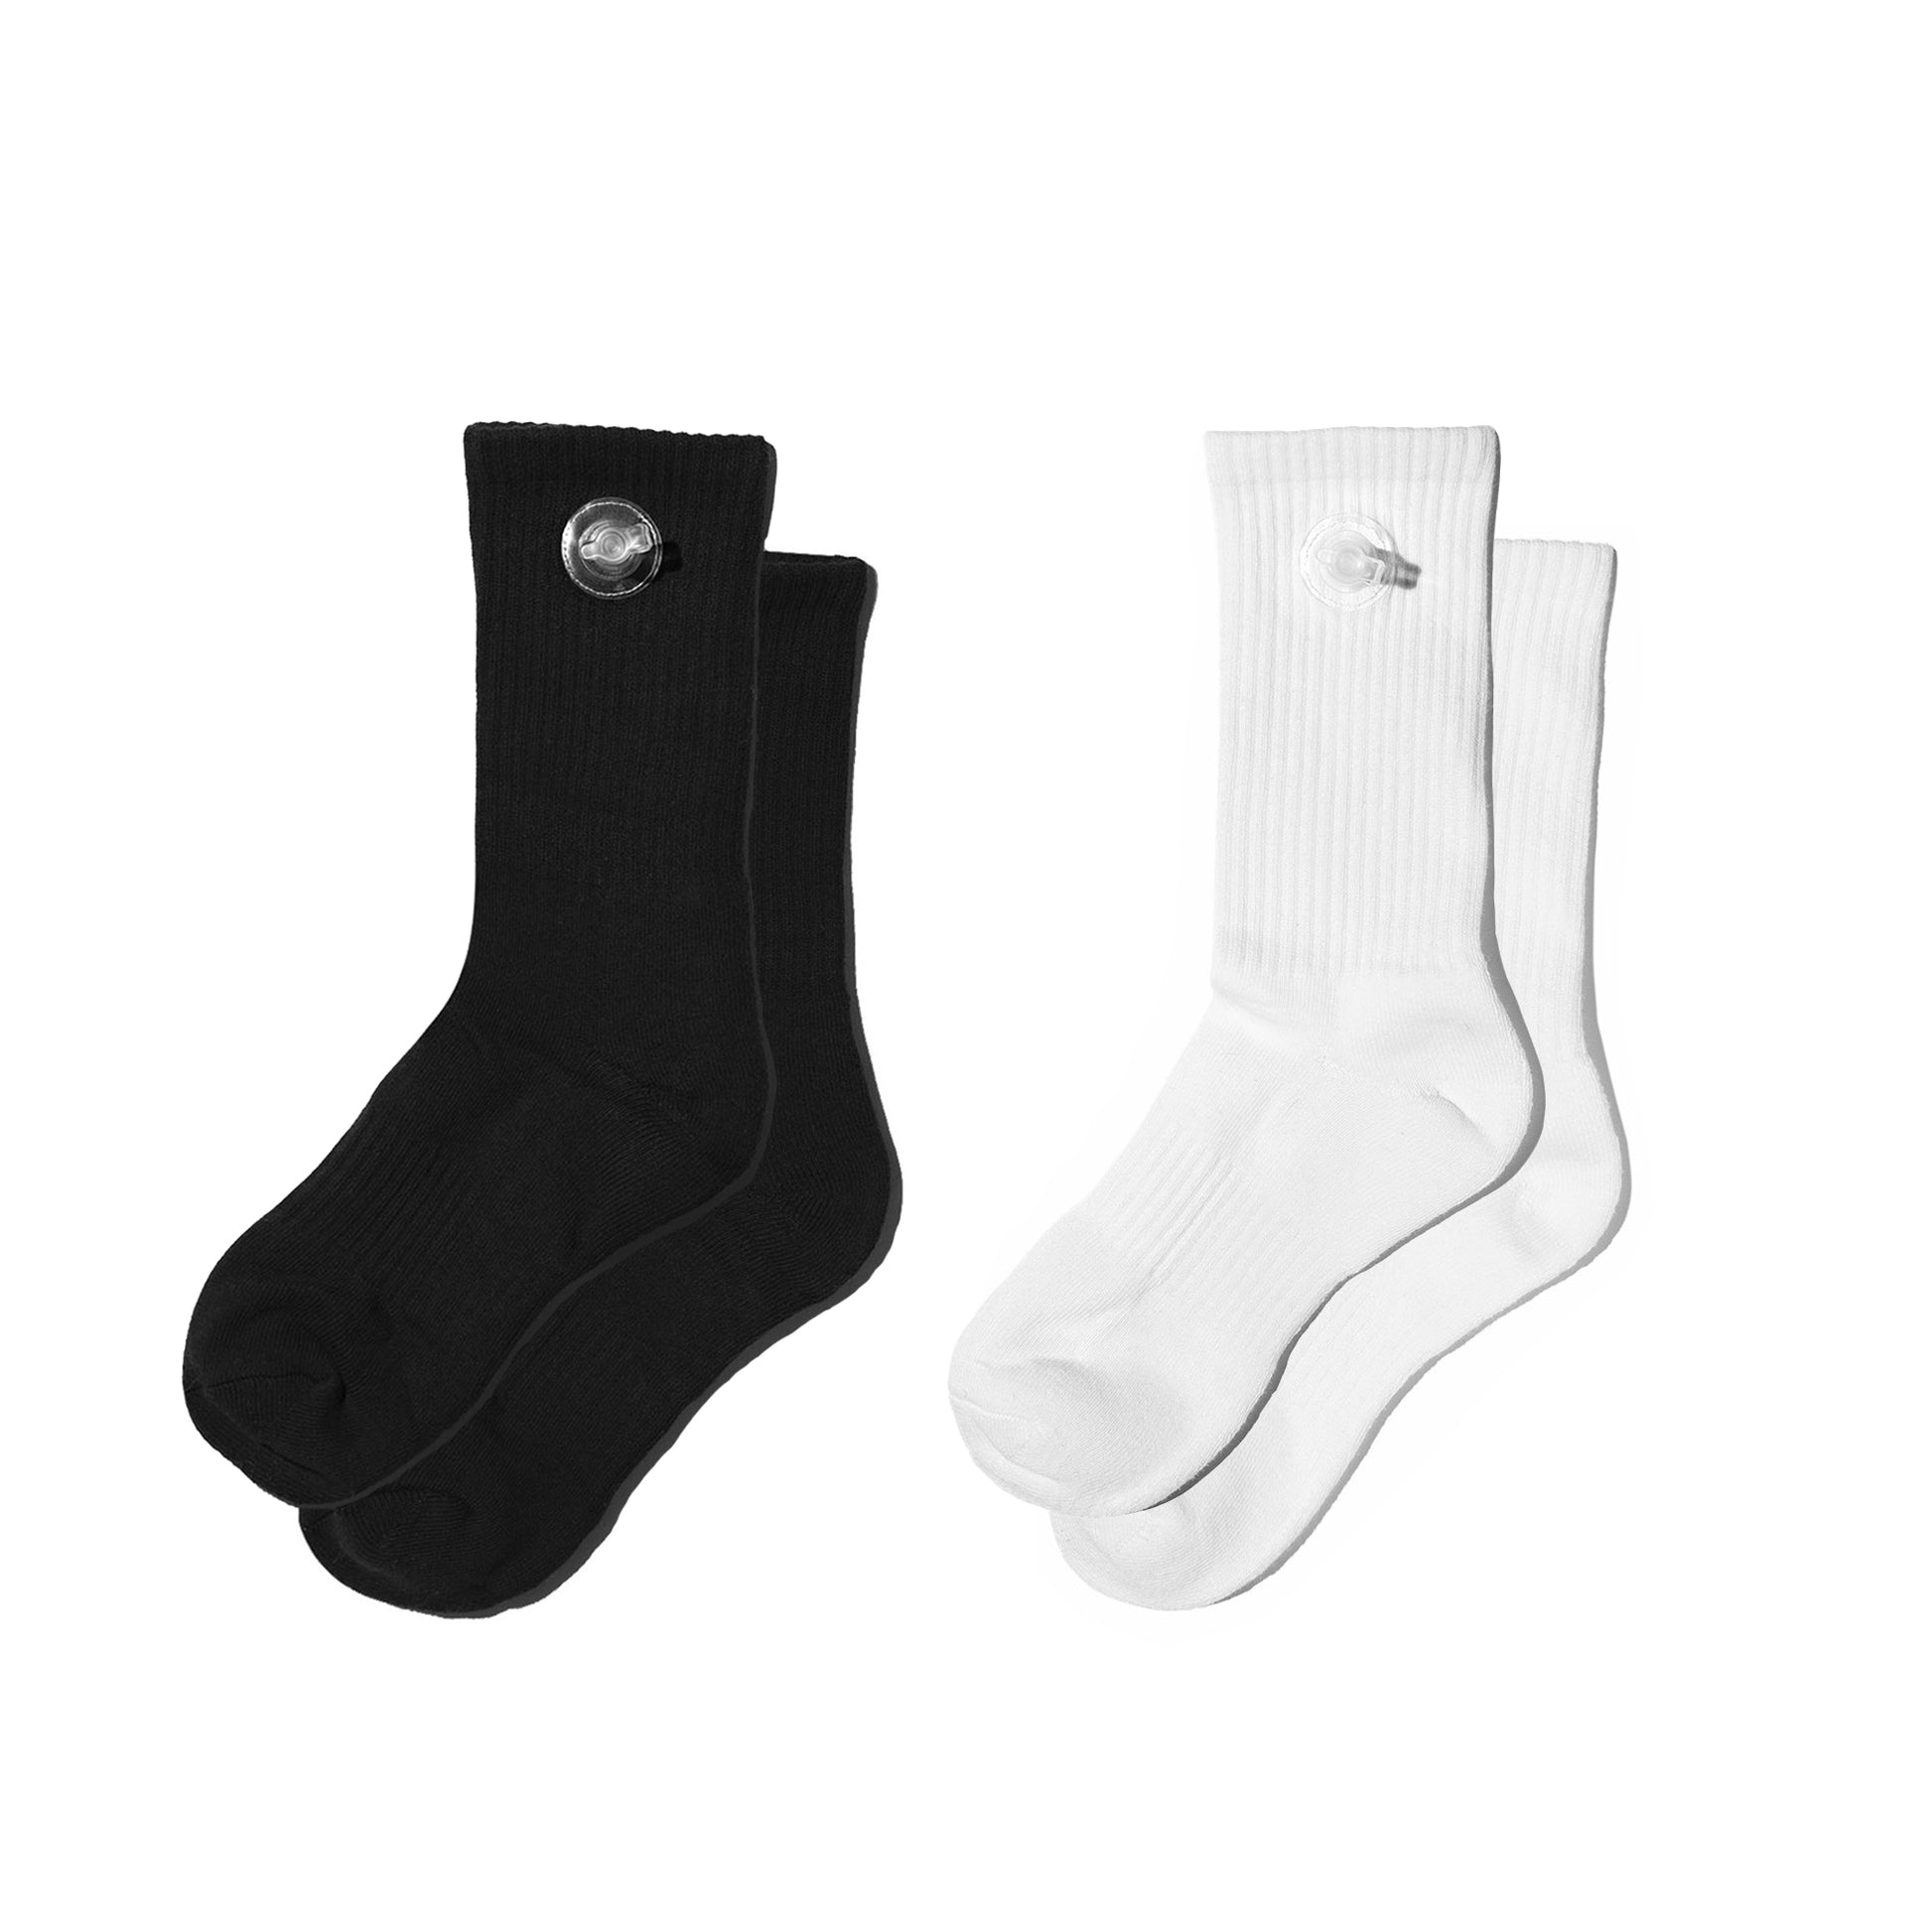 Toson, Inflatable Socks 2 Pack in Black + White